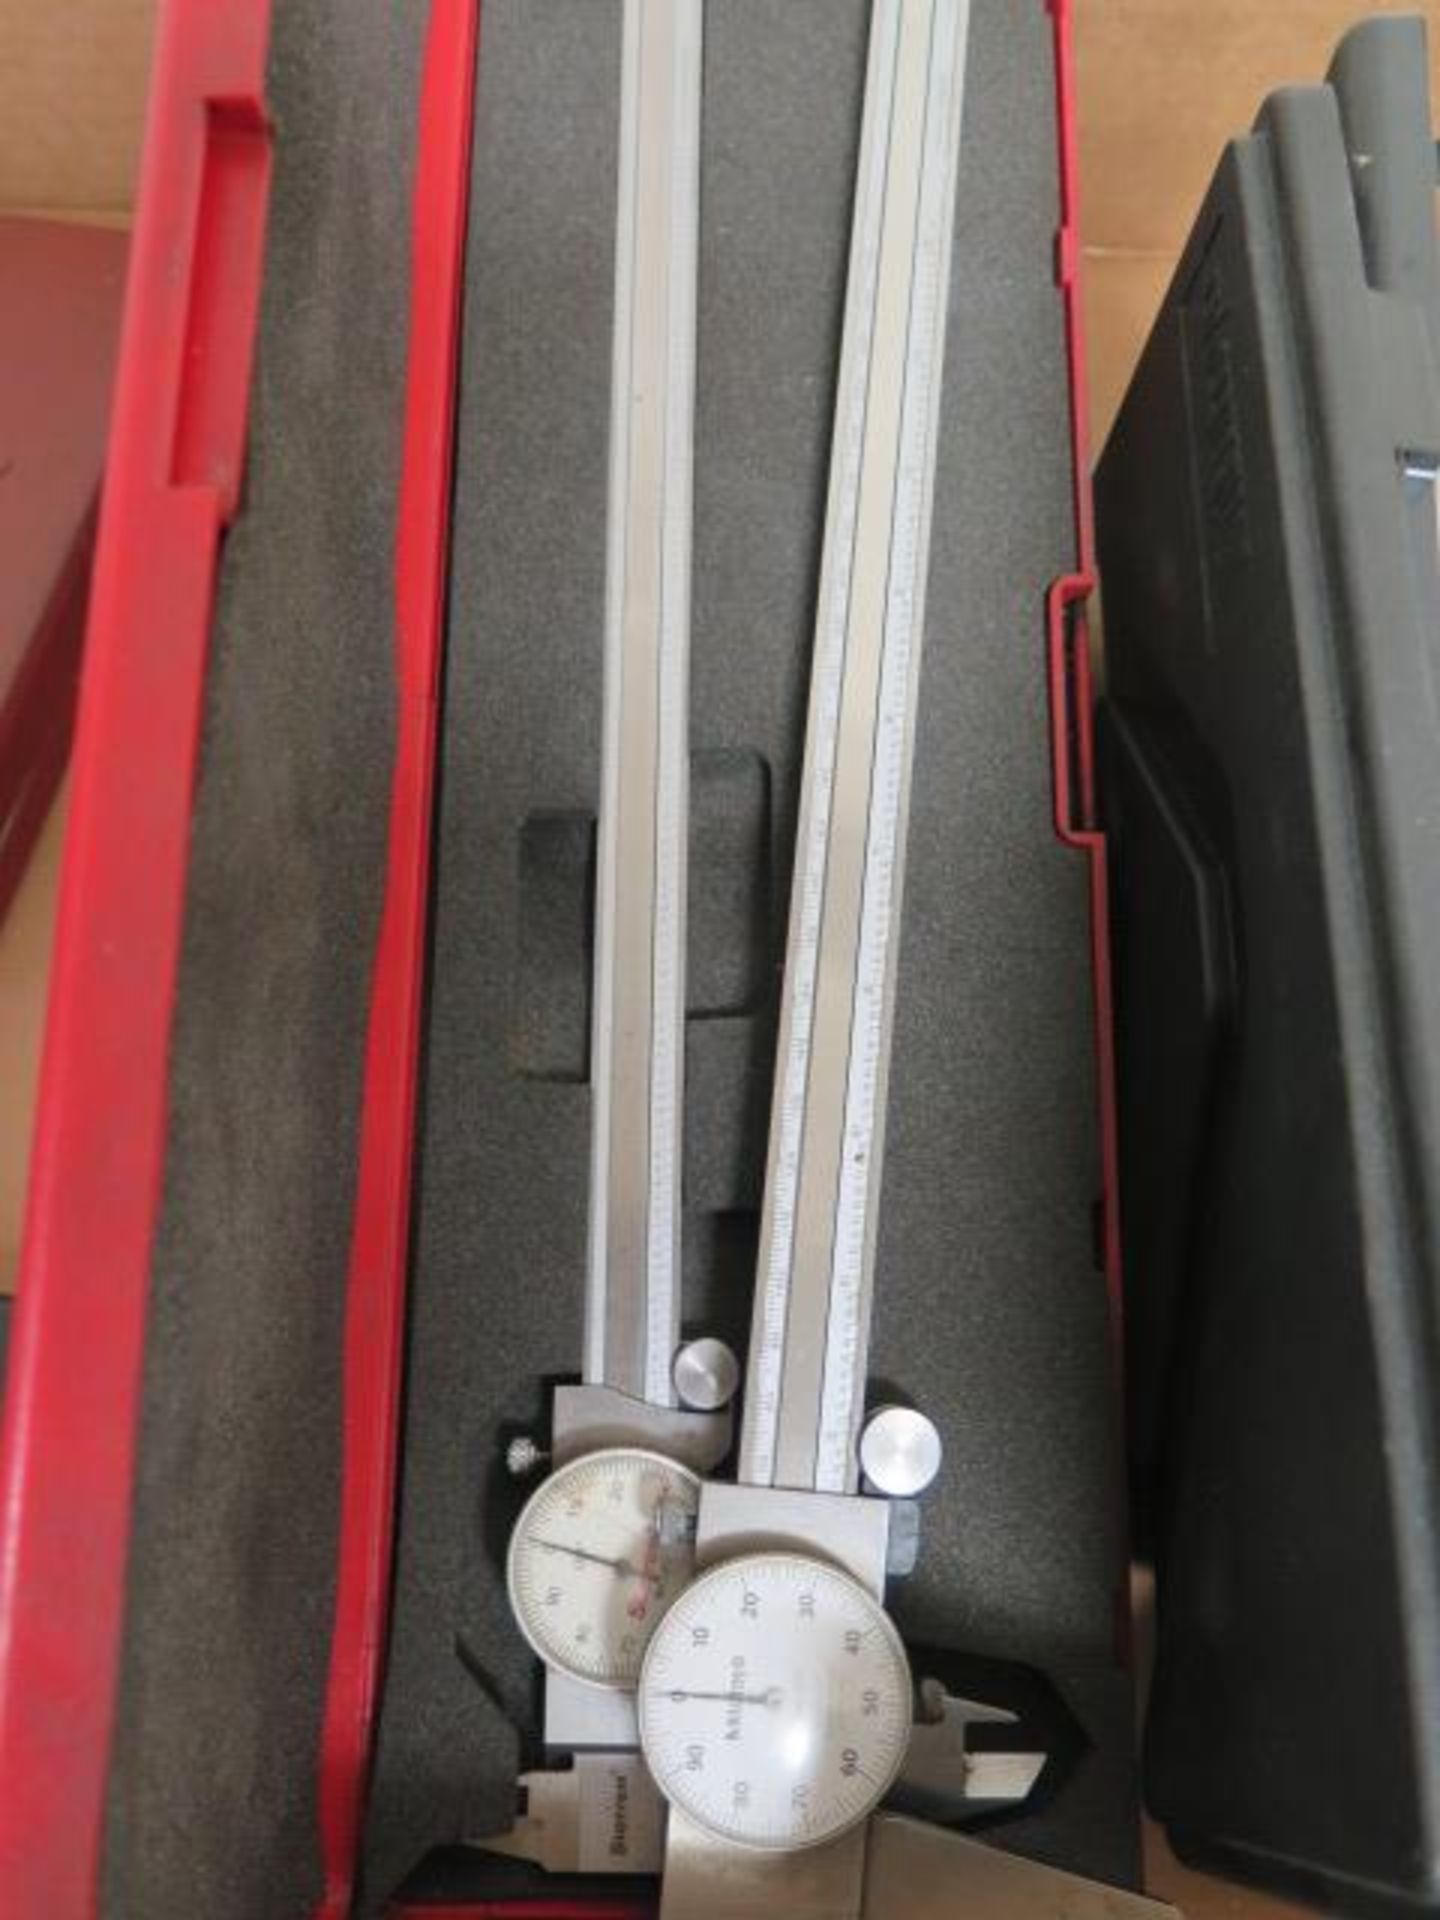 Mitutoyo and Starrett 6" and 12" Dial Calipers (4) (SOLD AS-IS - NO WARRANTY) - Image 2 of 3